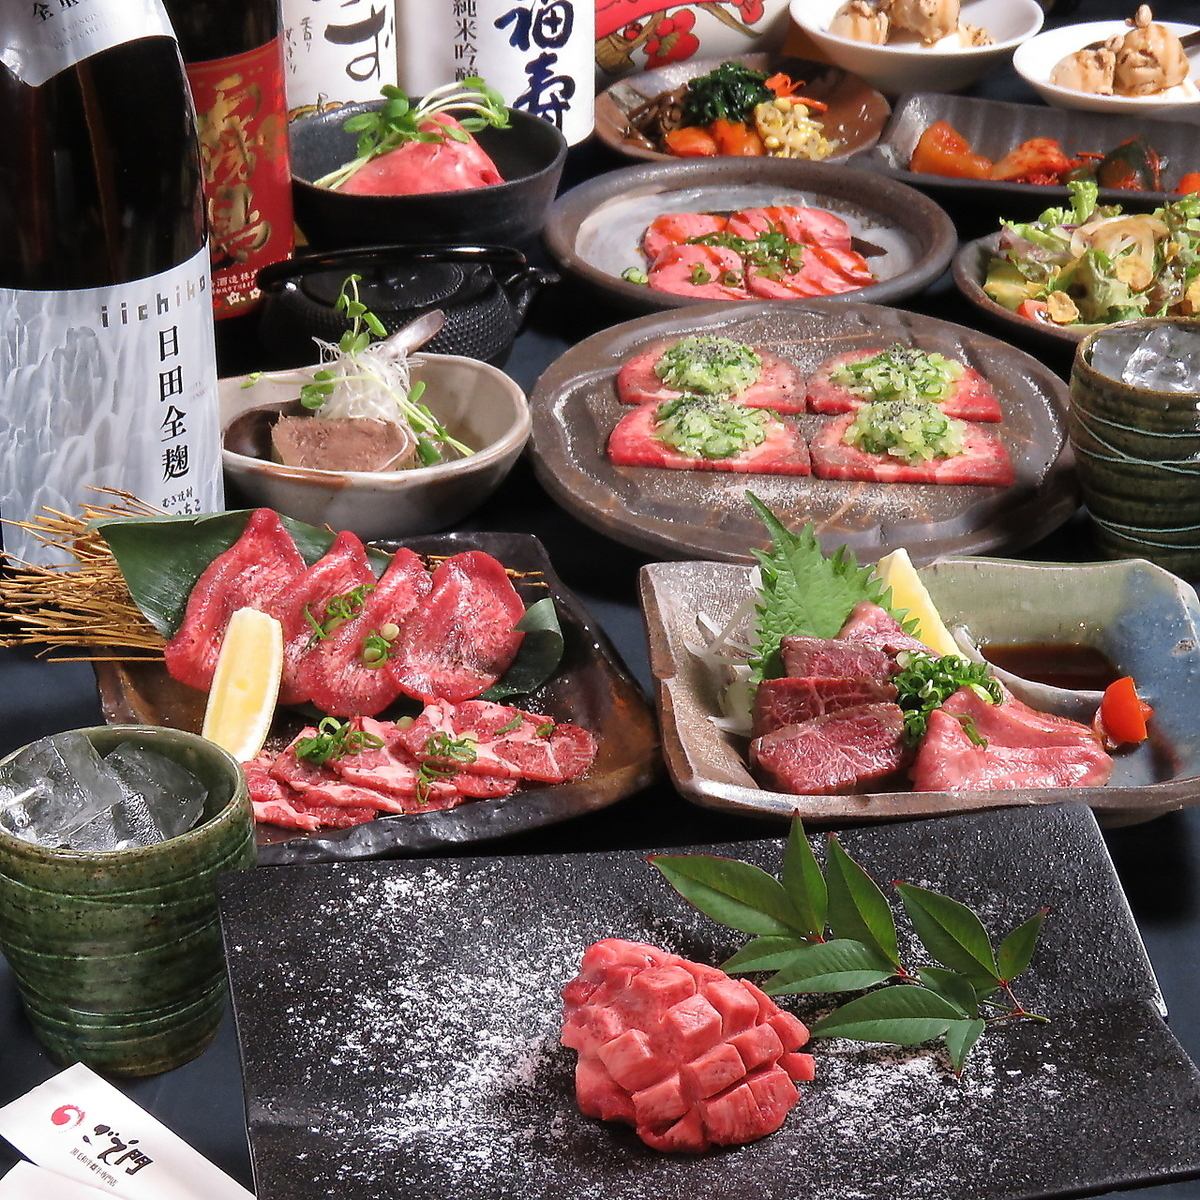 A course that includes high-quality cuts such as specially selected misoji and rare Wagyu skirt steak!